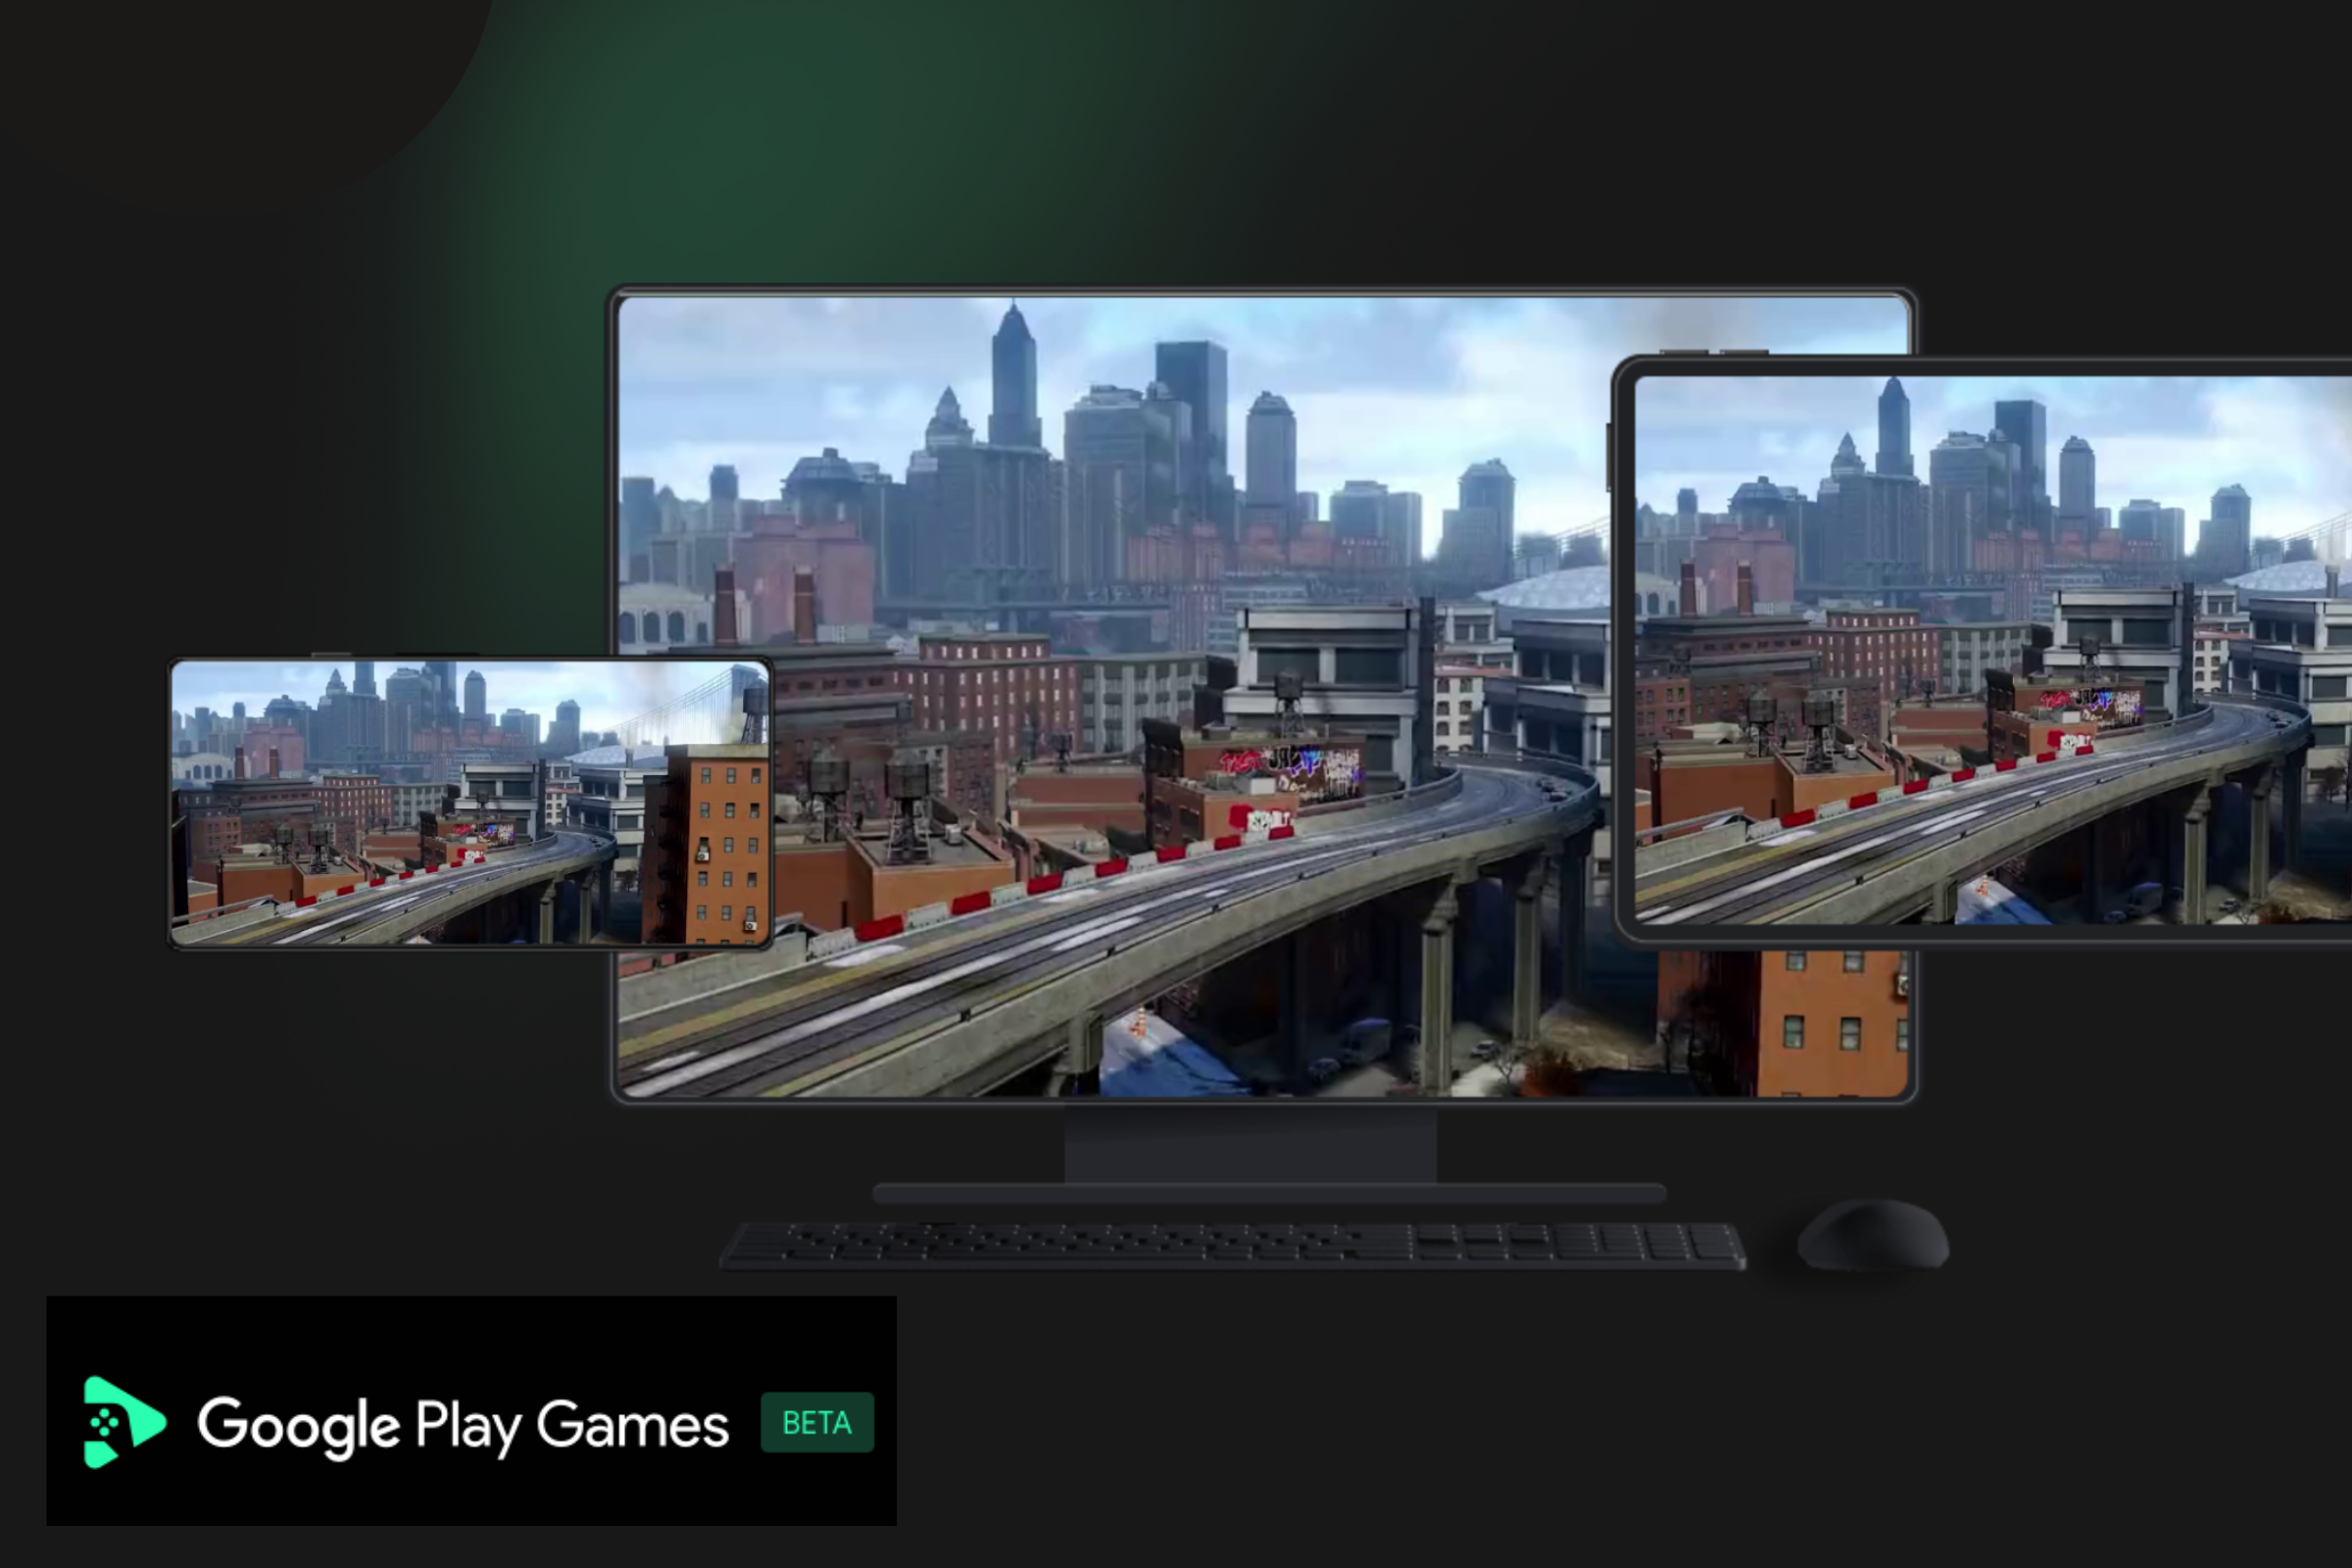 Google Play Games Expands to New Regions and Adds More Games